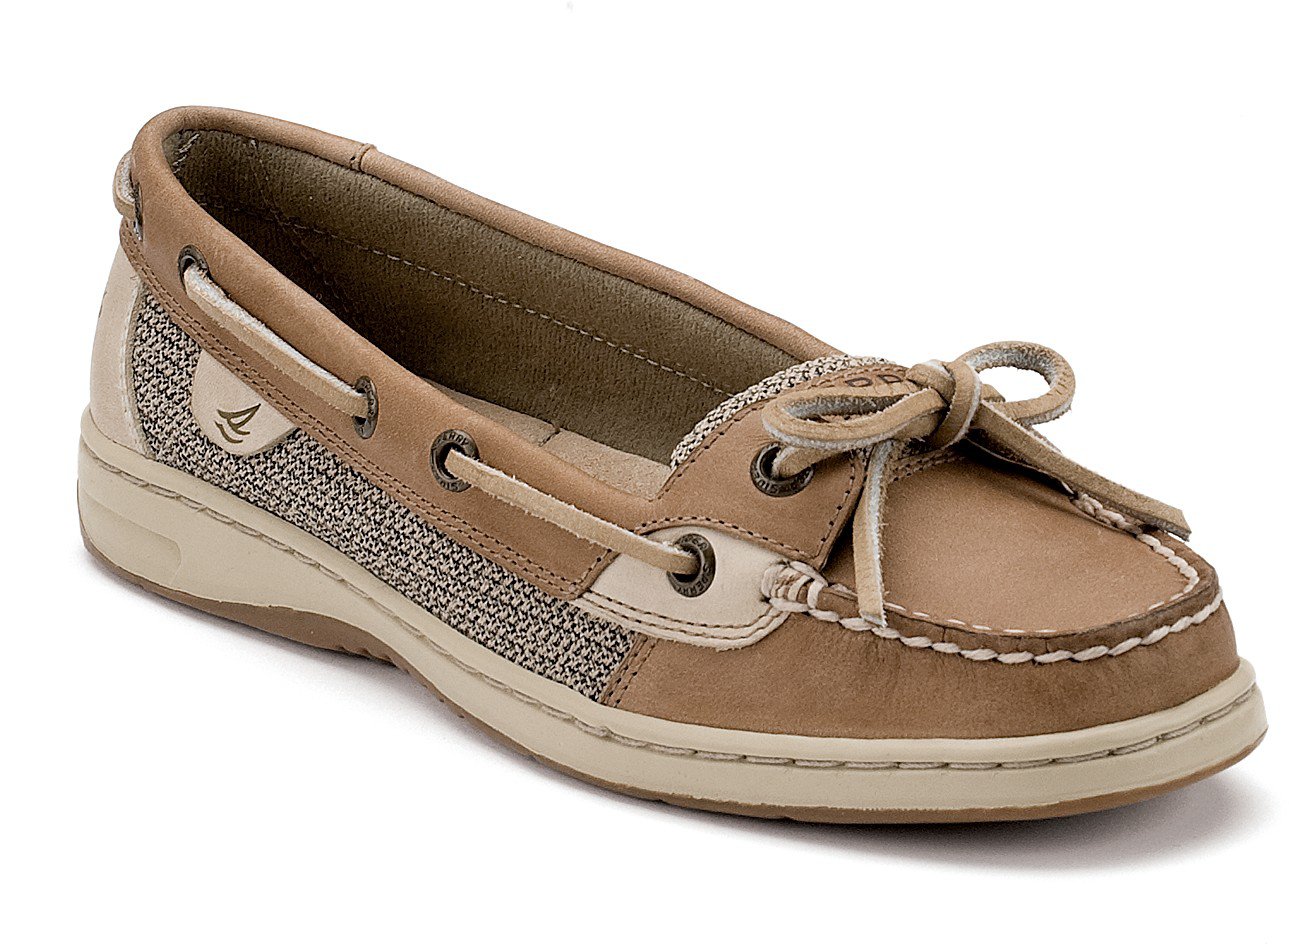 Women's Boat Shoes | Academy